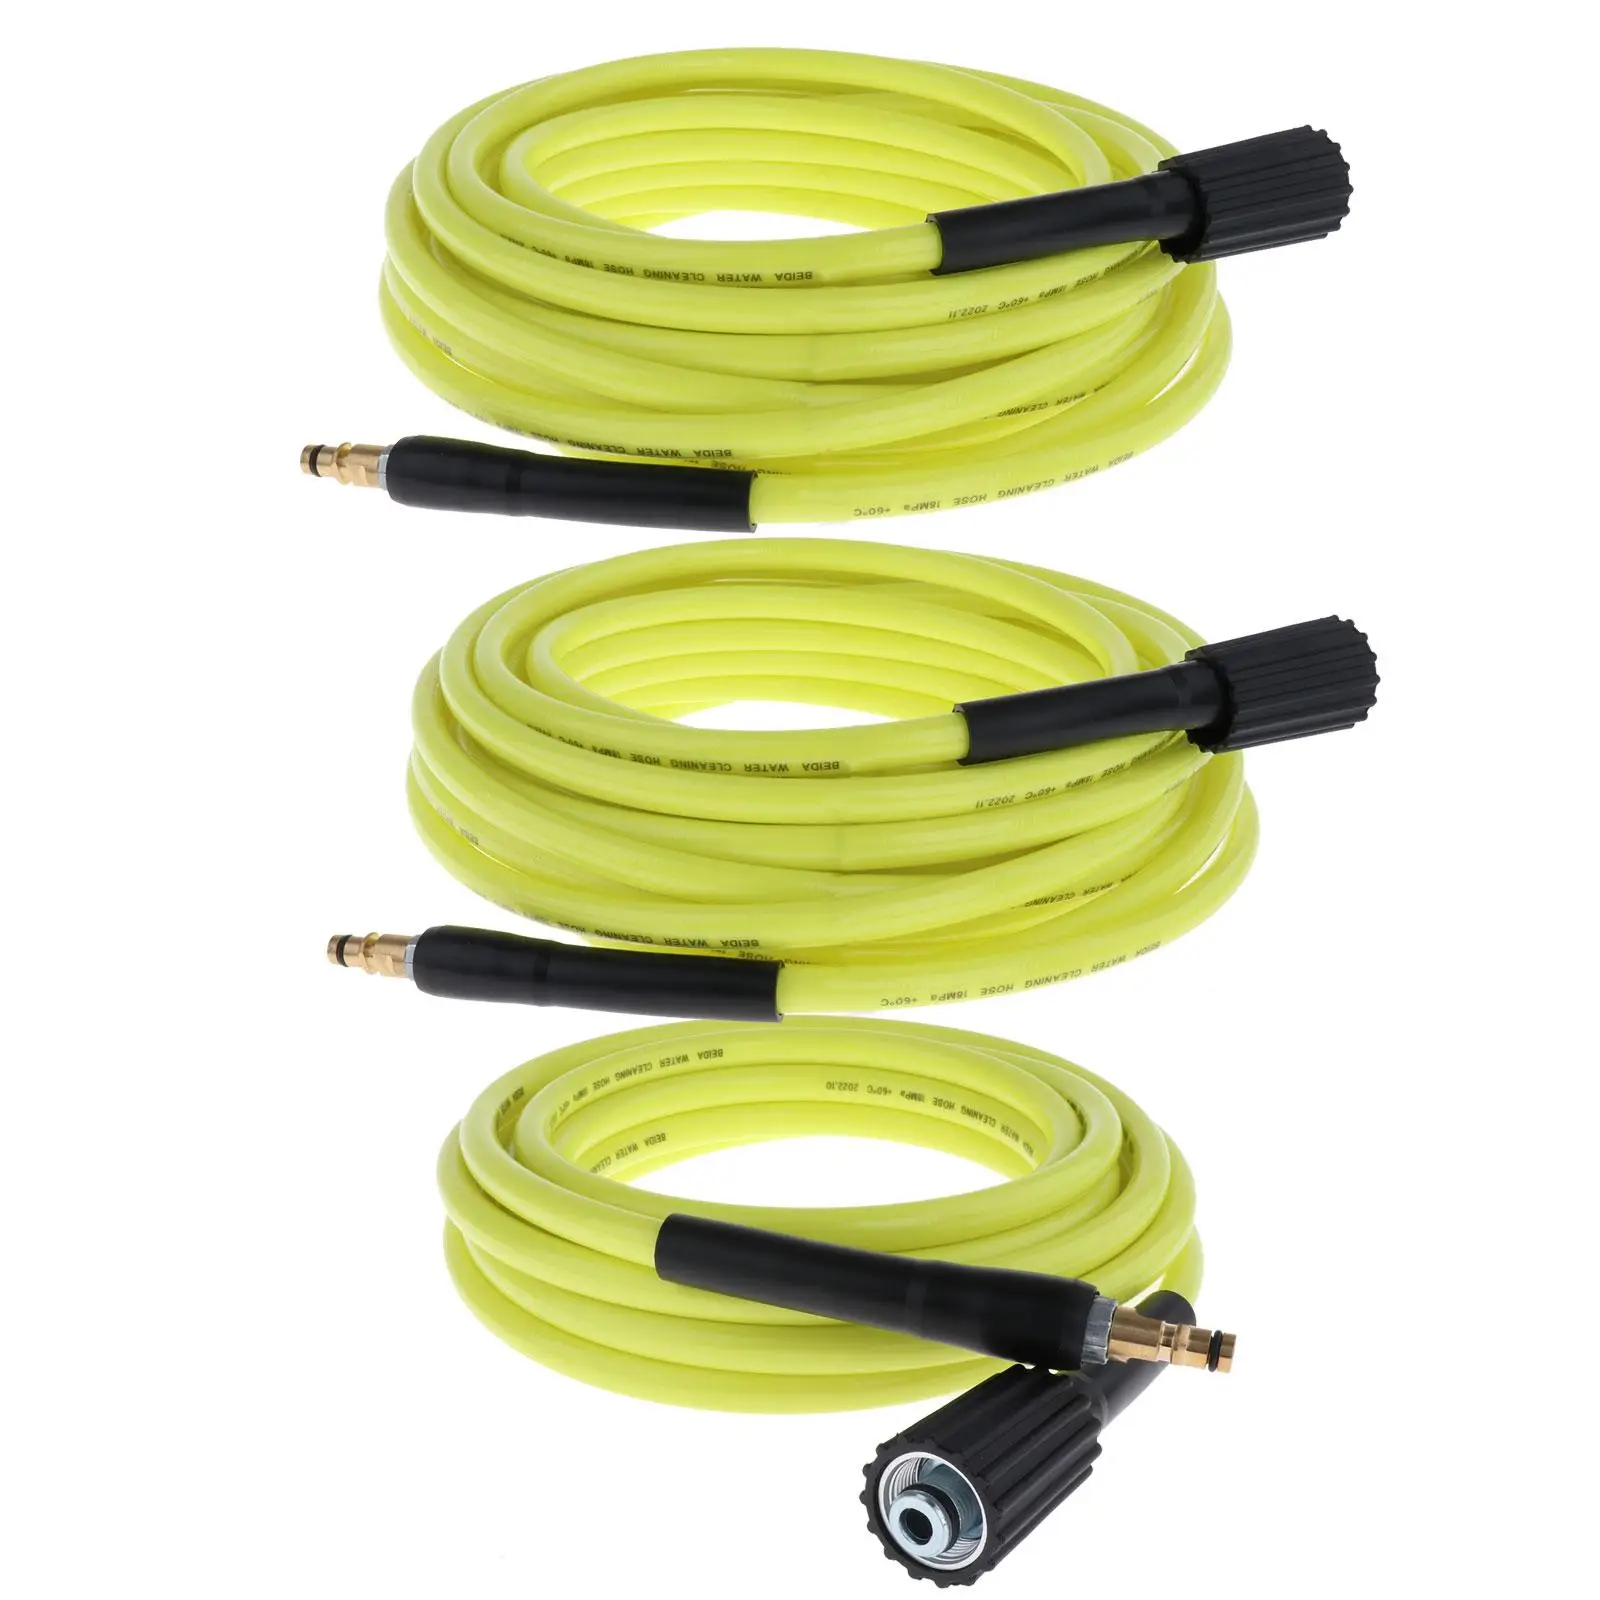 Pressure Washer Hose 2360 PSI Devices Replace Durable Watering Pipe Hose for Garden Lawn Cleaner for K Series K2 K3 K4 K5 K6 K7